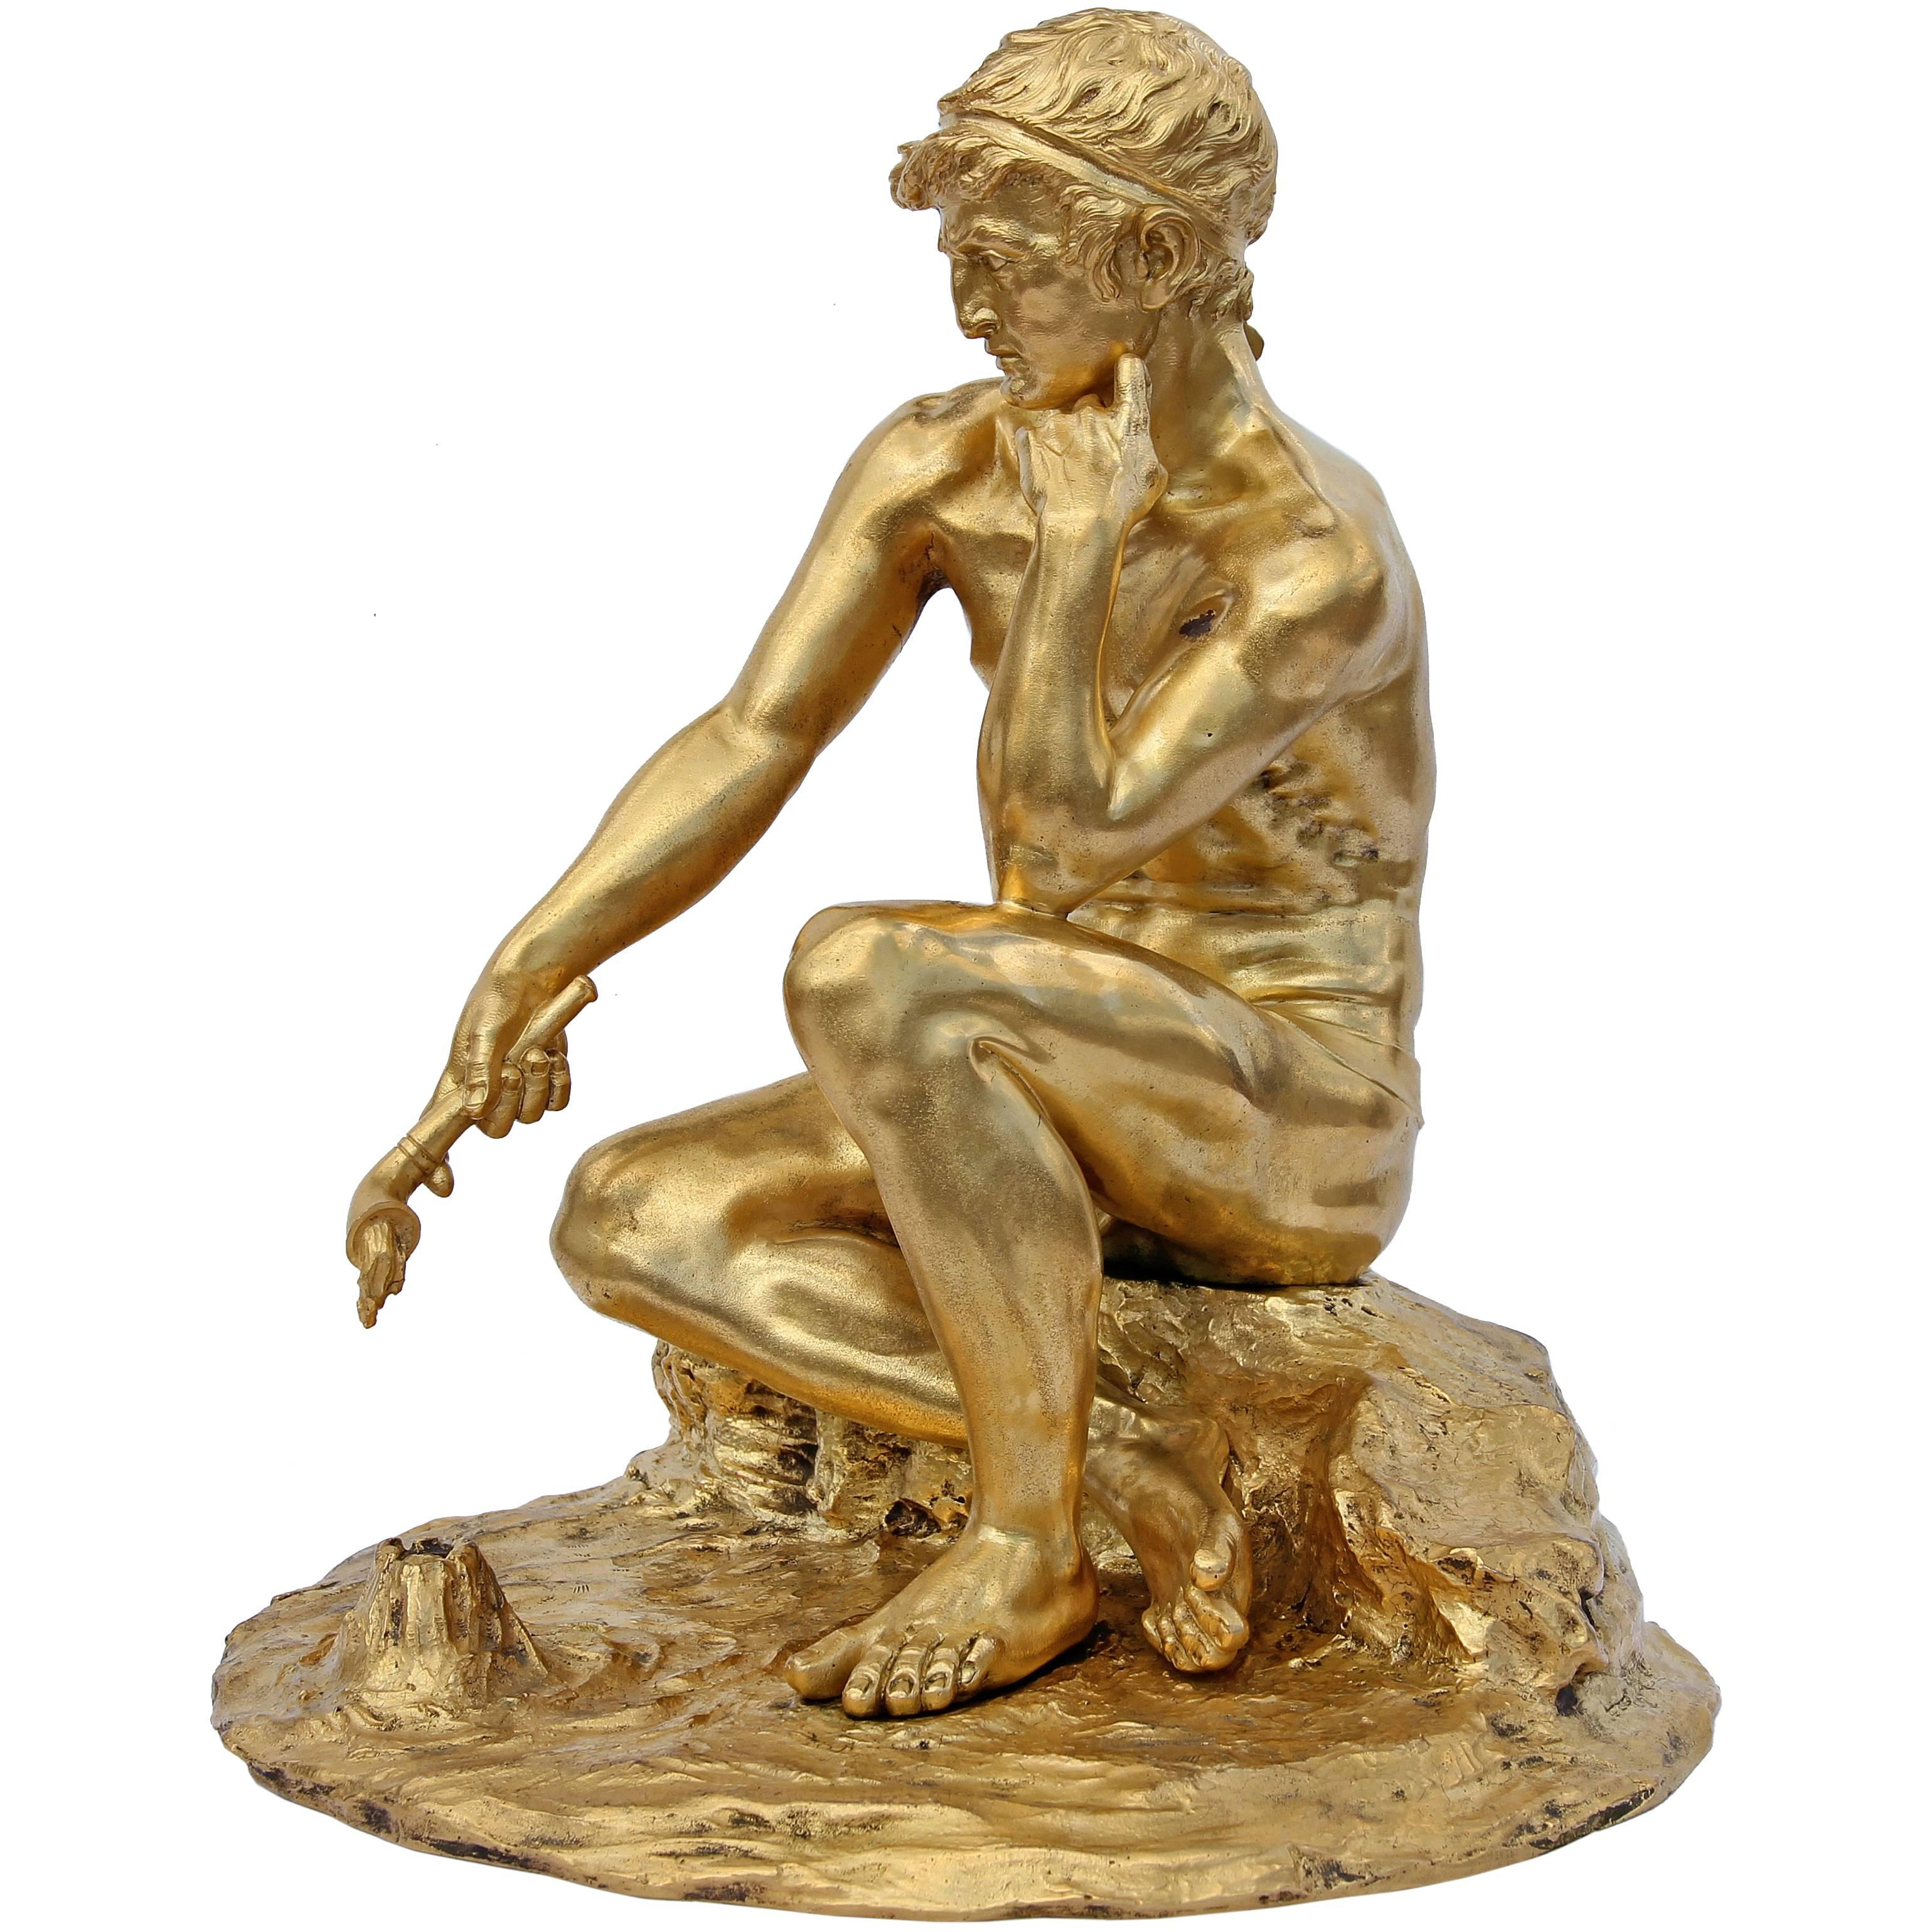 Neoclassical Revival Classical Male Nude Bronze Sculpture by E.F. Caldwell